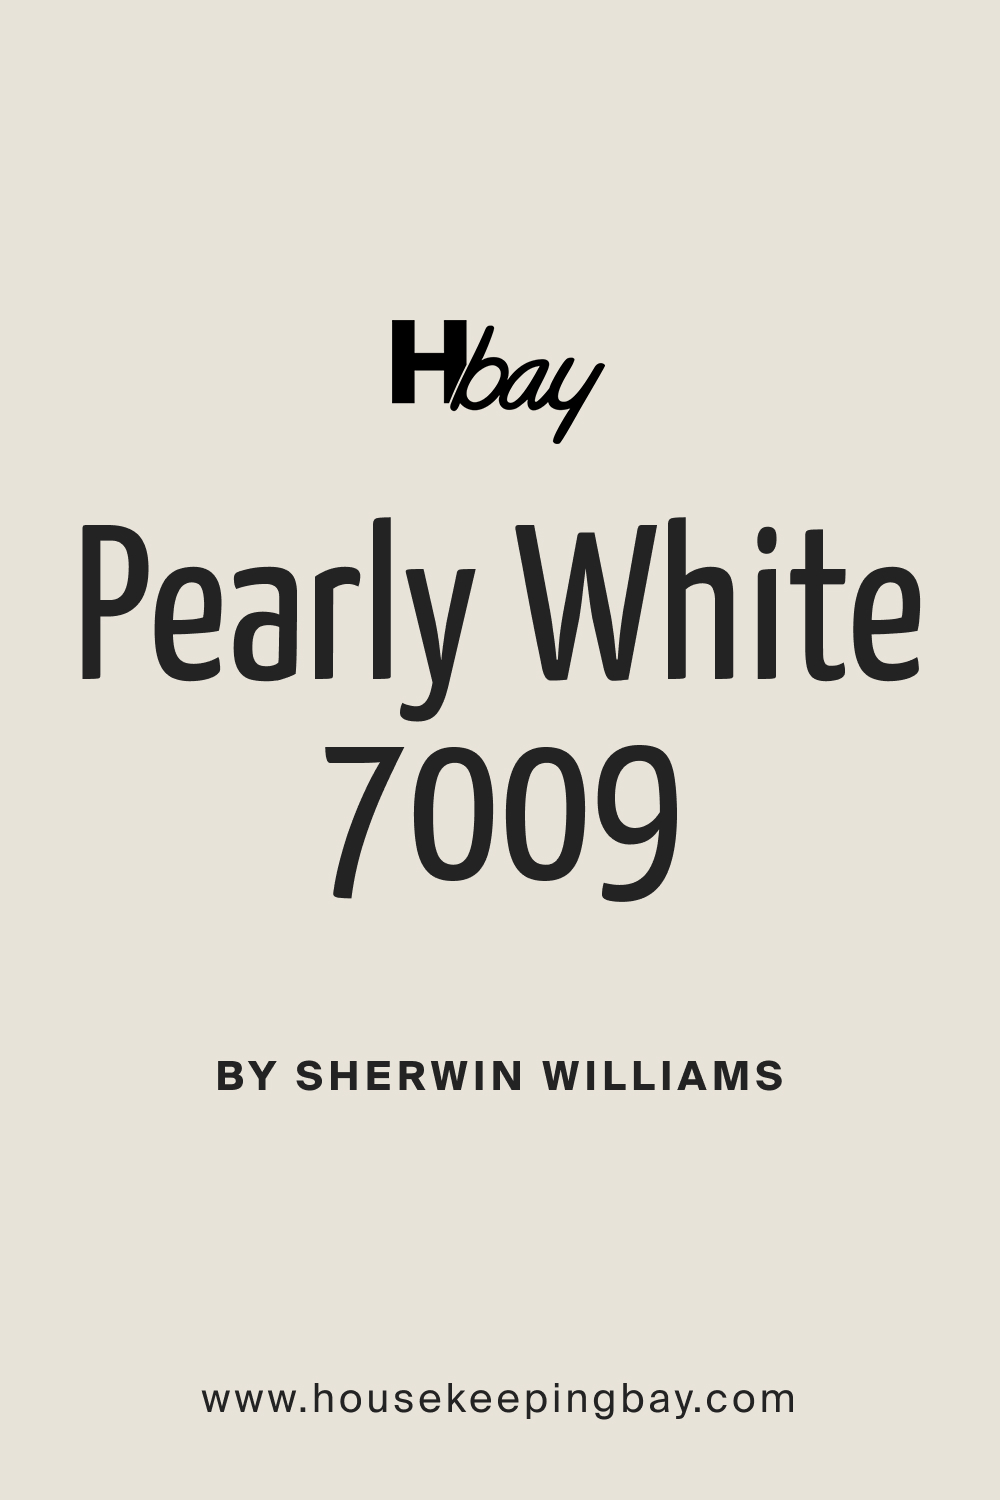 Pearly White SW 7009 Paint Color by Sherwin Williams